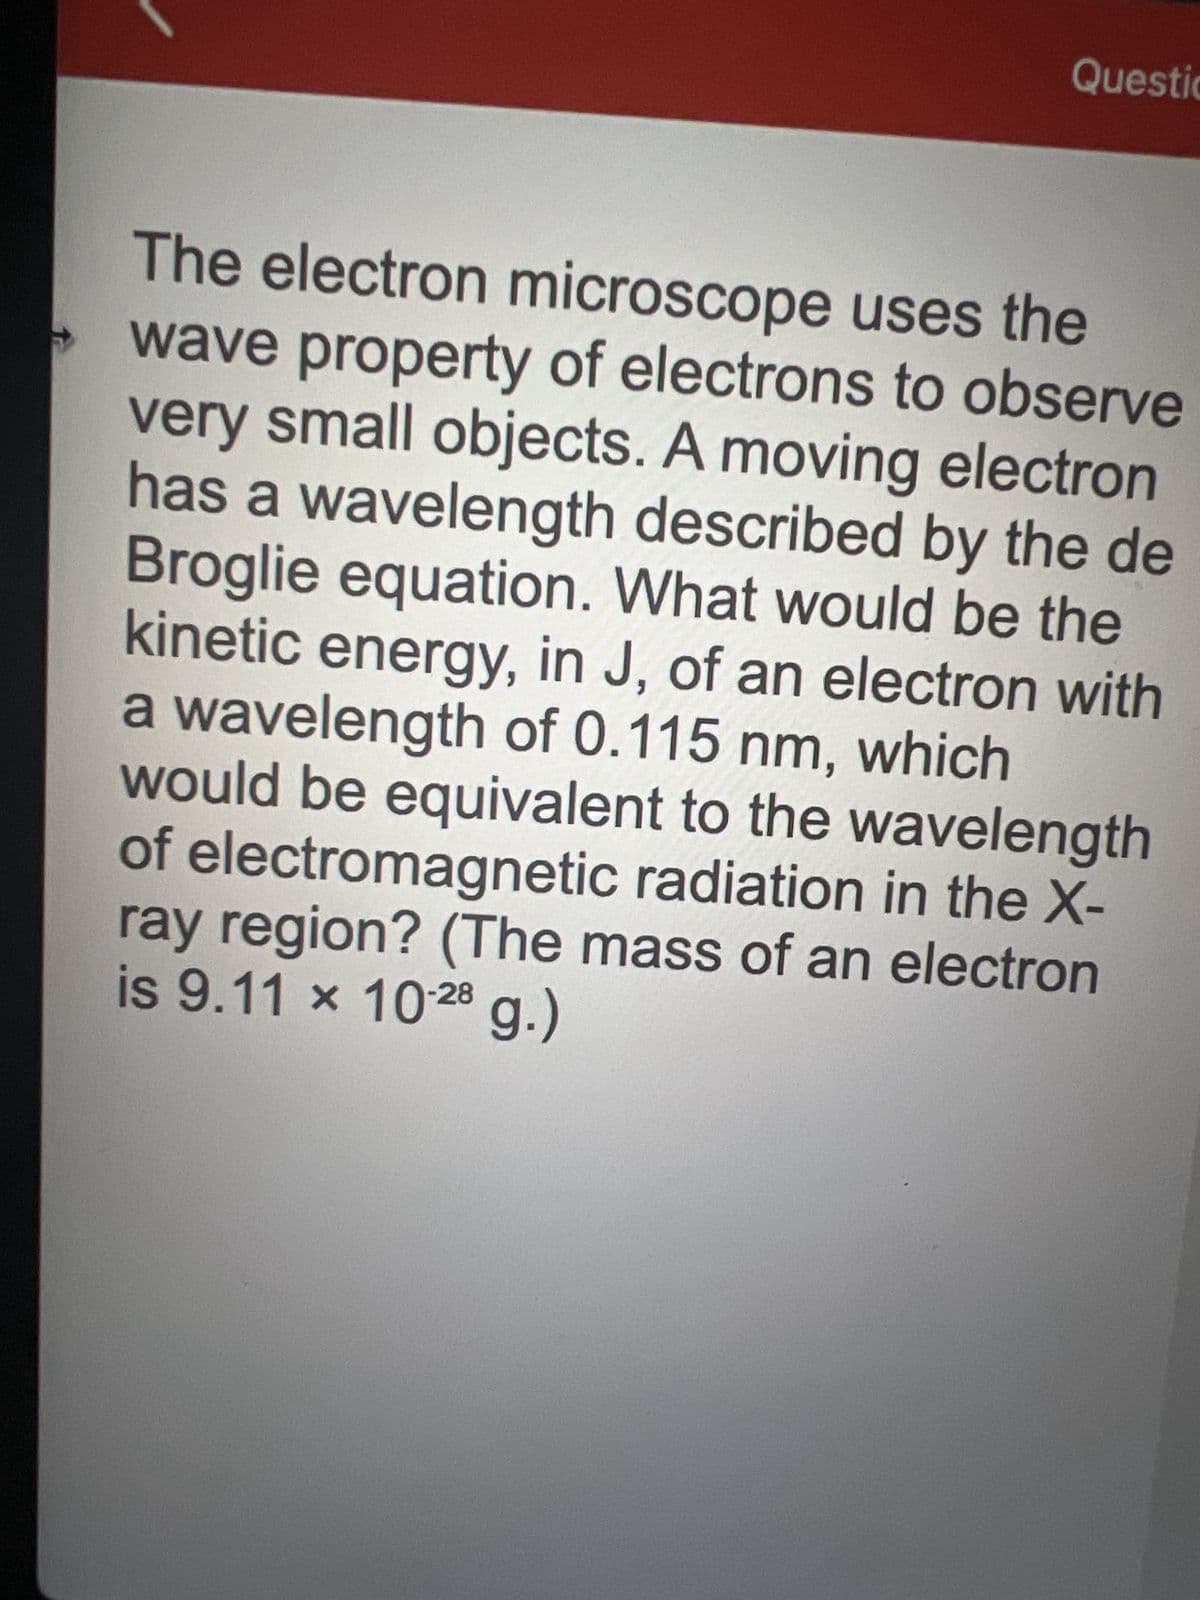 →
Questio
The electron microscope uses the
wave property of electrons to observe
very small objects. A moving electron
has a wavelength described by the de
Broglie equation. What would be the
kinetic energy, in J, of an electron with
a wavelength of 0.115 nm, which
would be equivalent to the wavelength
of electromagnetic radiation in the X-
ray region? (The mass of an electron
is 9.11 × 10-28 g.)